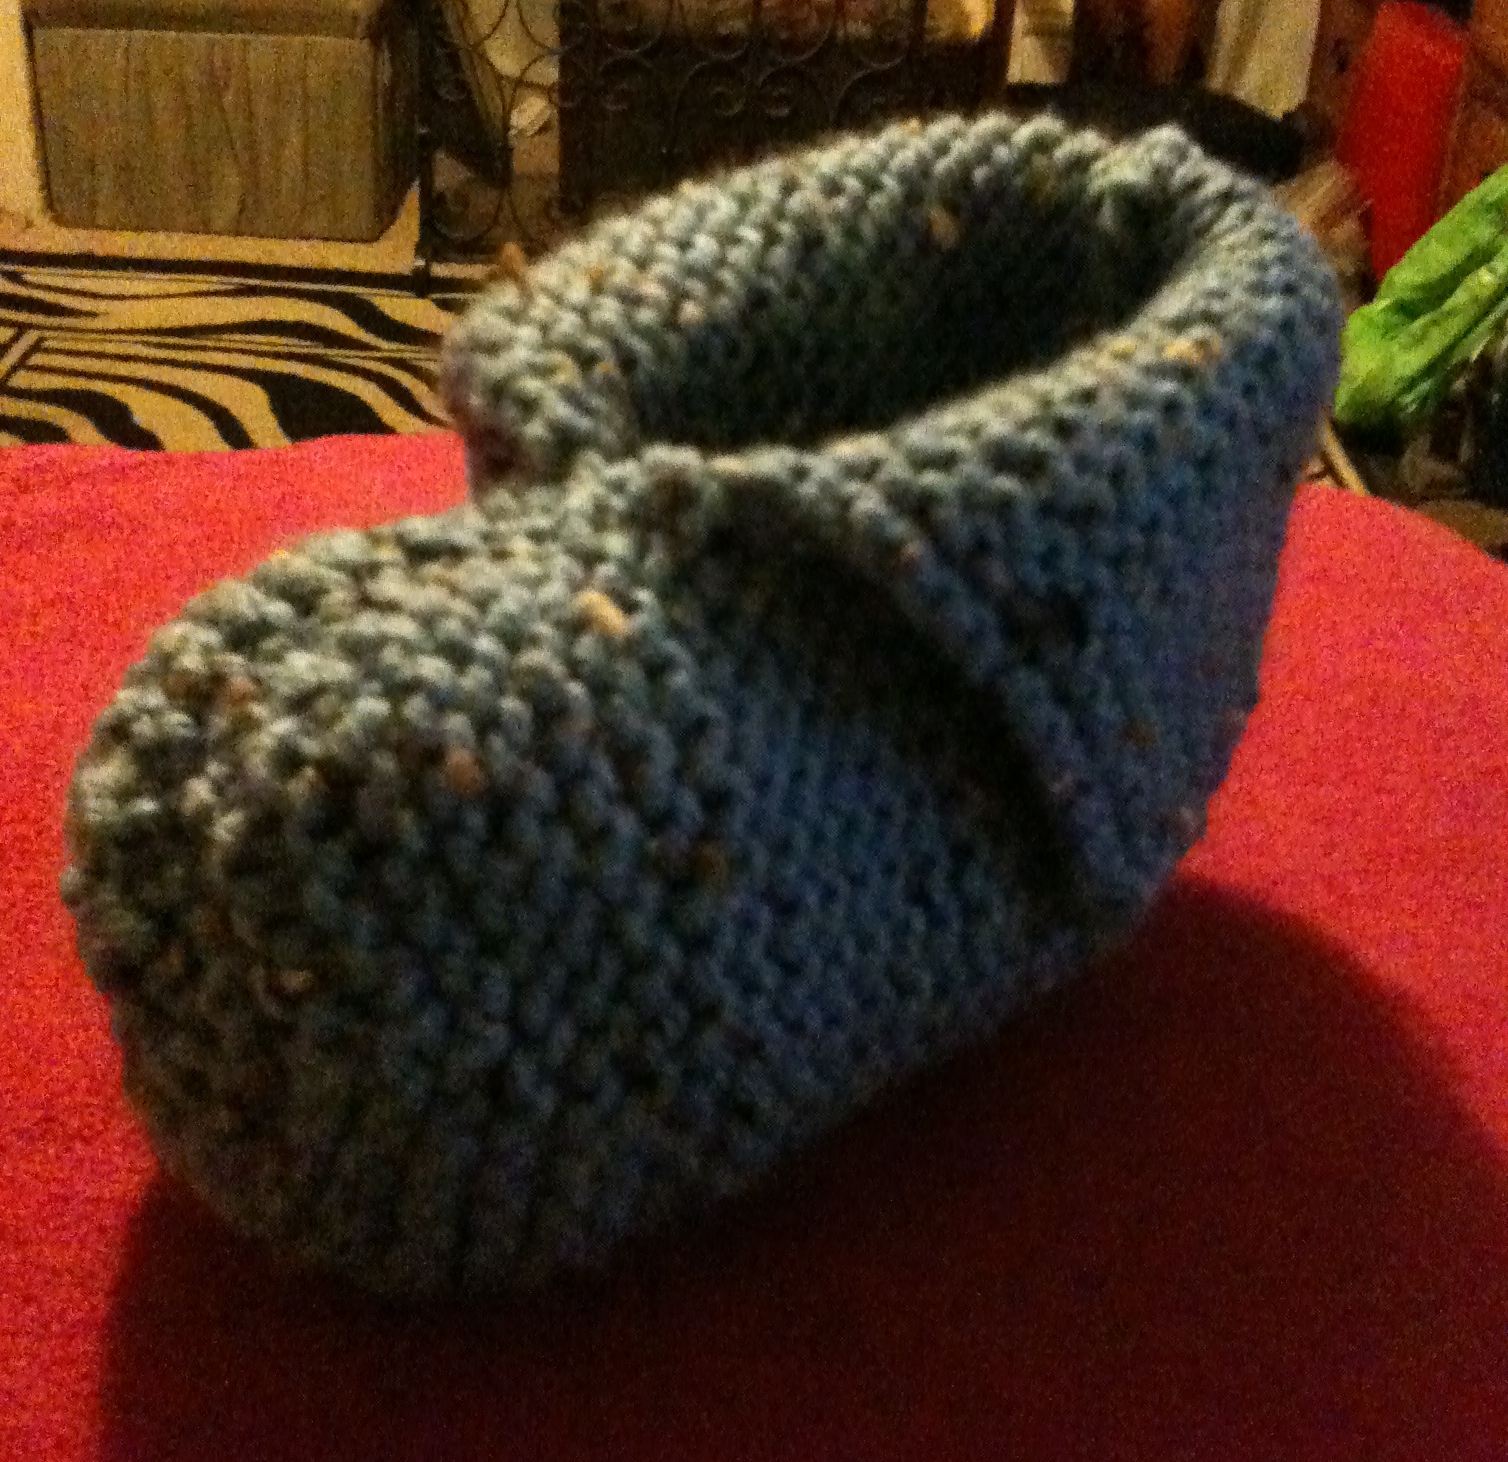 I made a baby bootie!